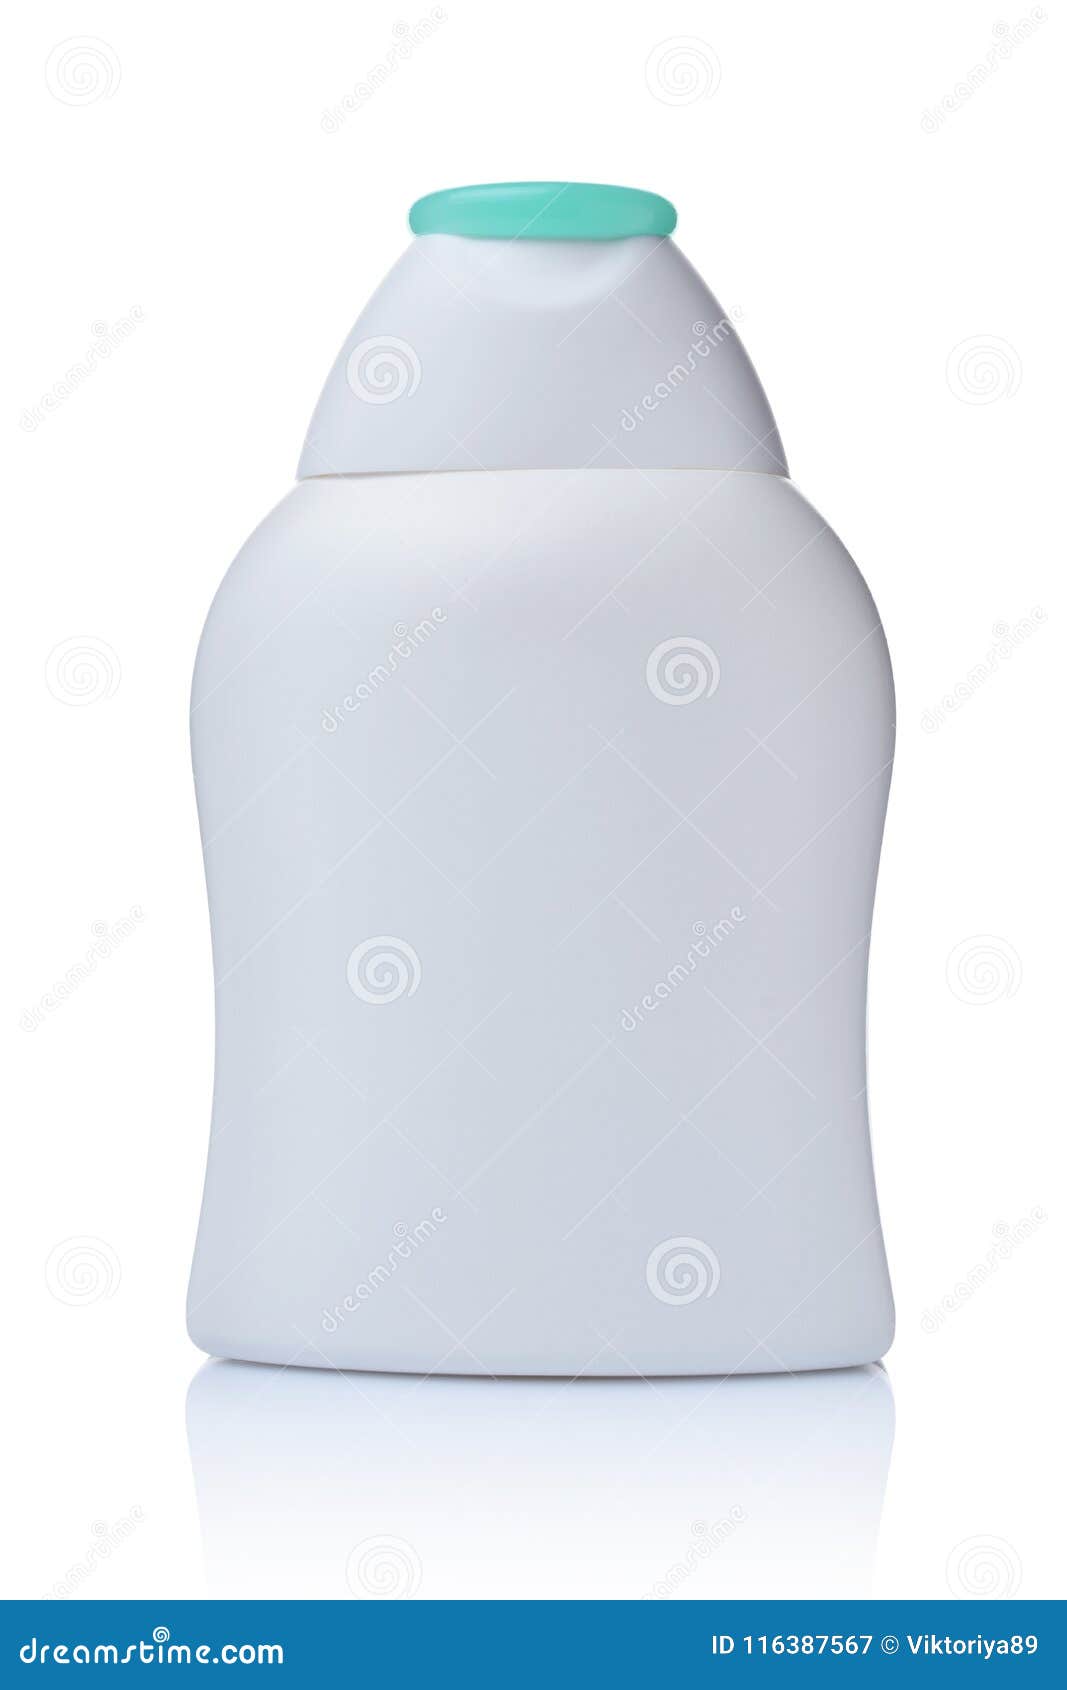 Download Blank White Mockup Figured Bottle Of Cosmetic Product With ...